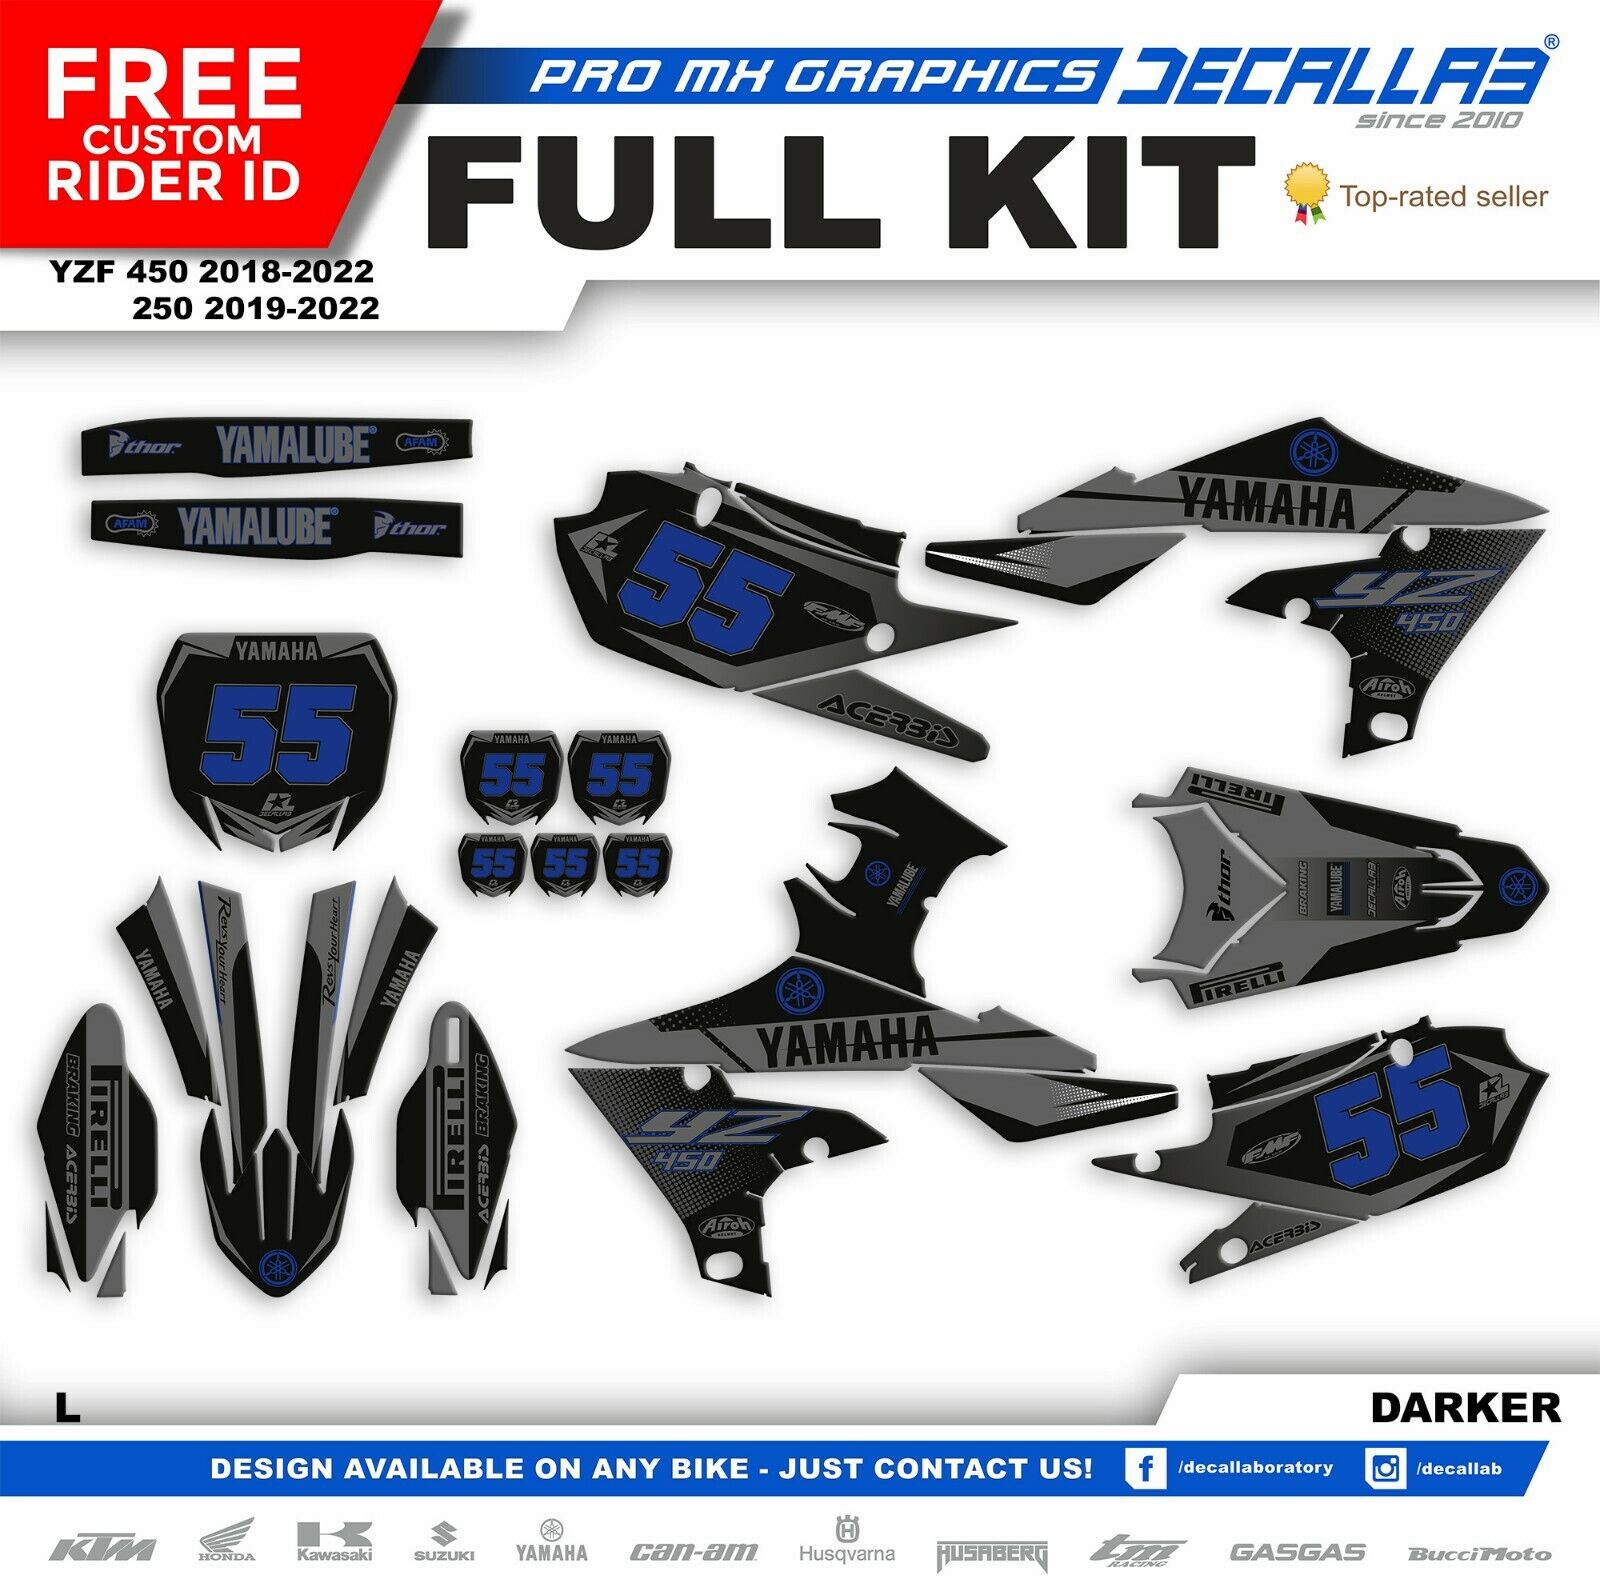 YAMAHA YZF 250 YZF 450 2018 2019 2020 2022 MX Graphics Decals Stickers Decallab